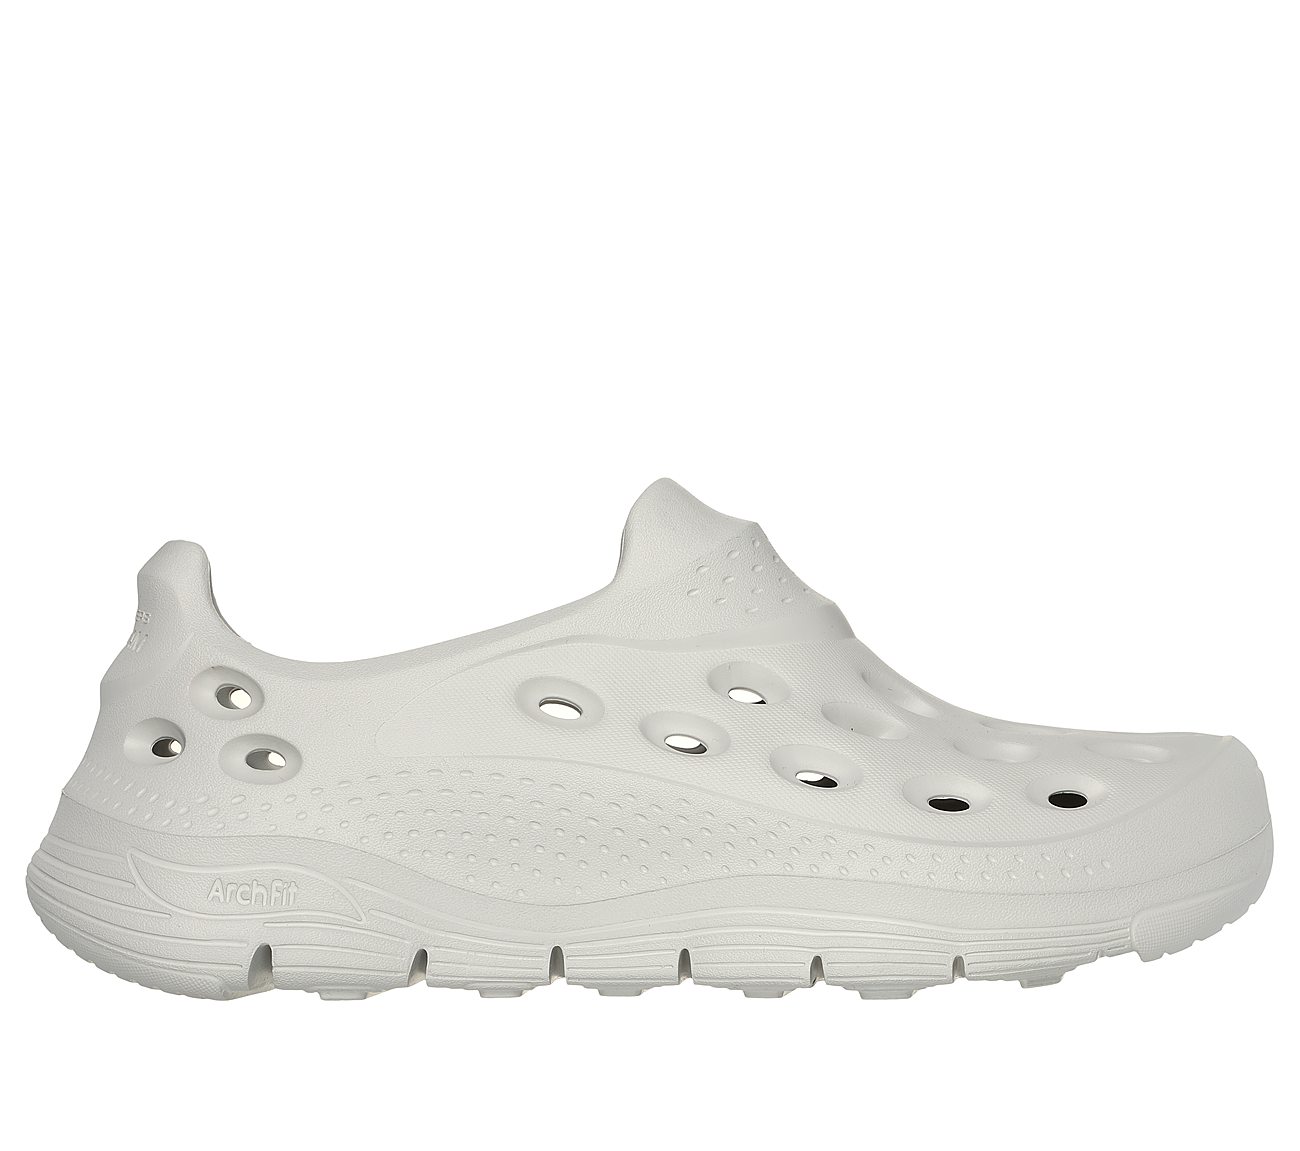 ARCH FIT GO FOAM 1, OFF WHITE Footwear Lateral View